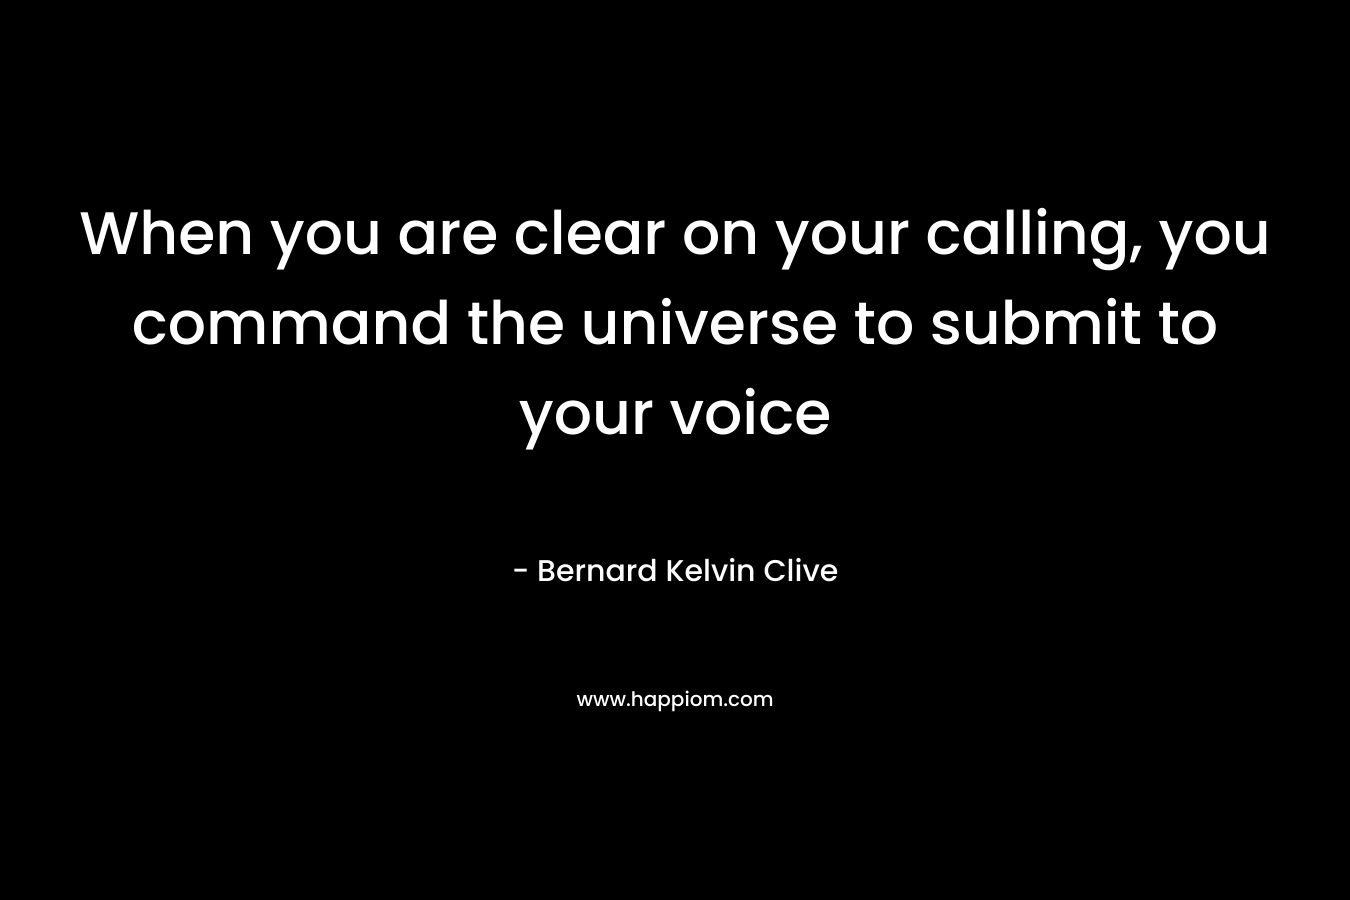 When you are clear on your calling, you command the universe to submit to your voice